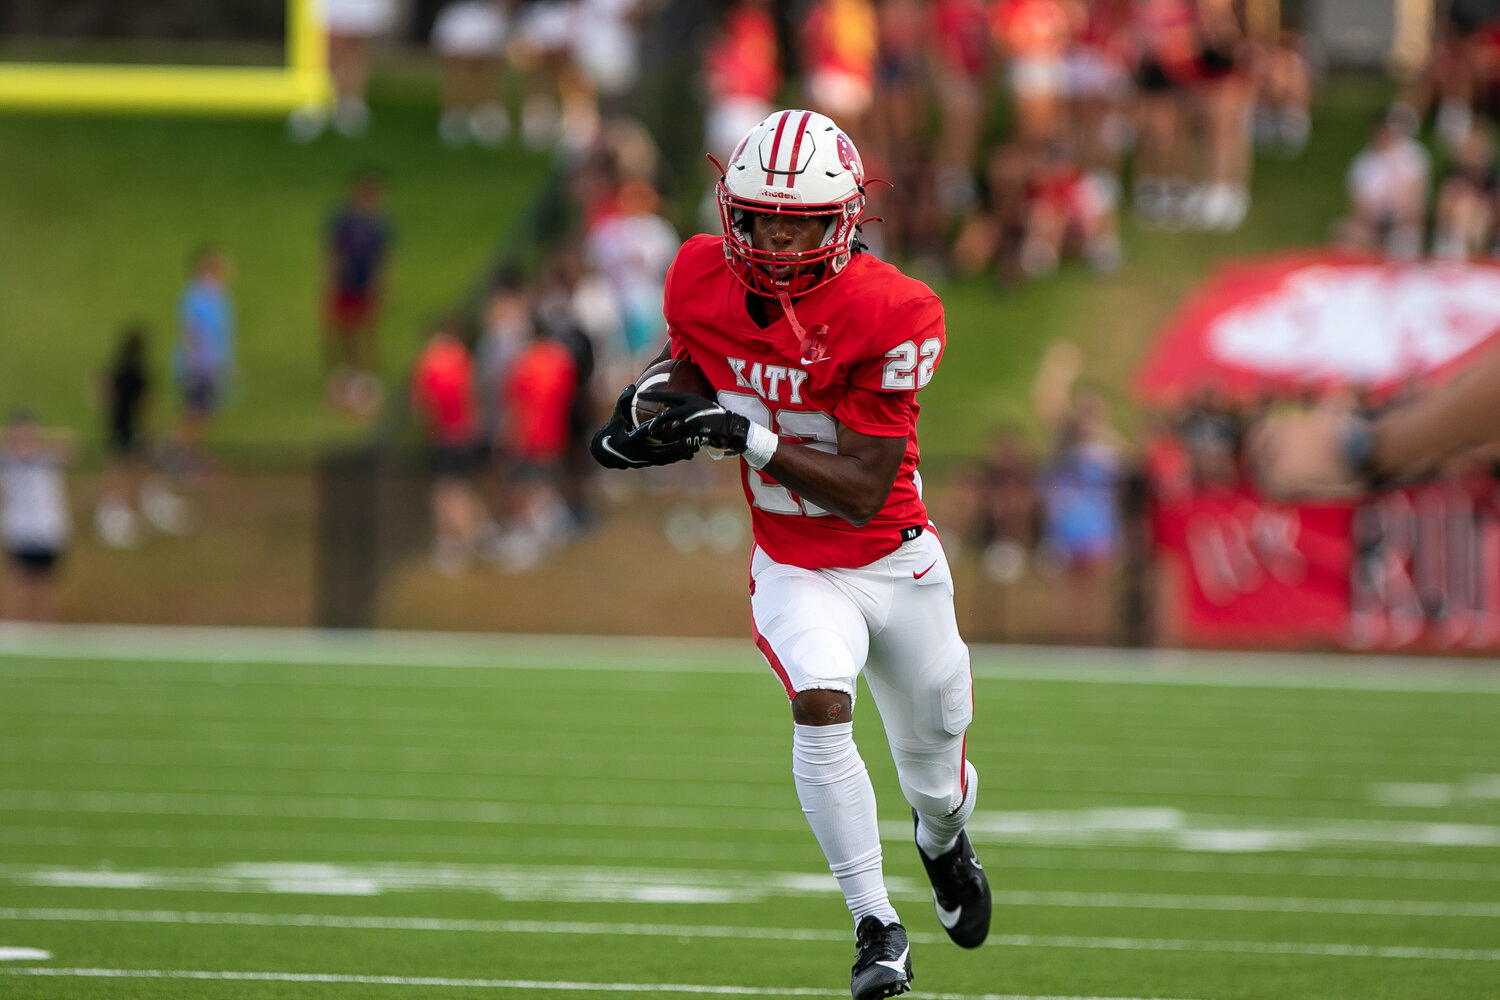 Cade McCall runs downfield during Friday's game between Katy and Tompkins at Rhodes Stadium.